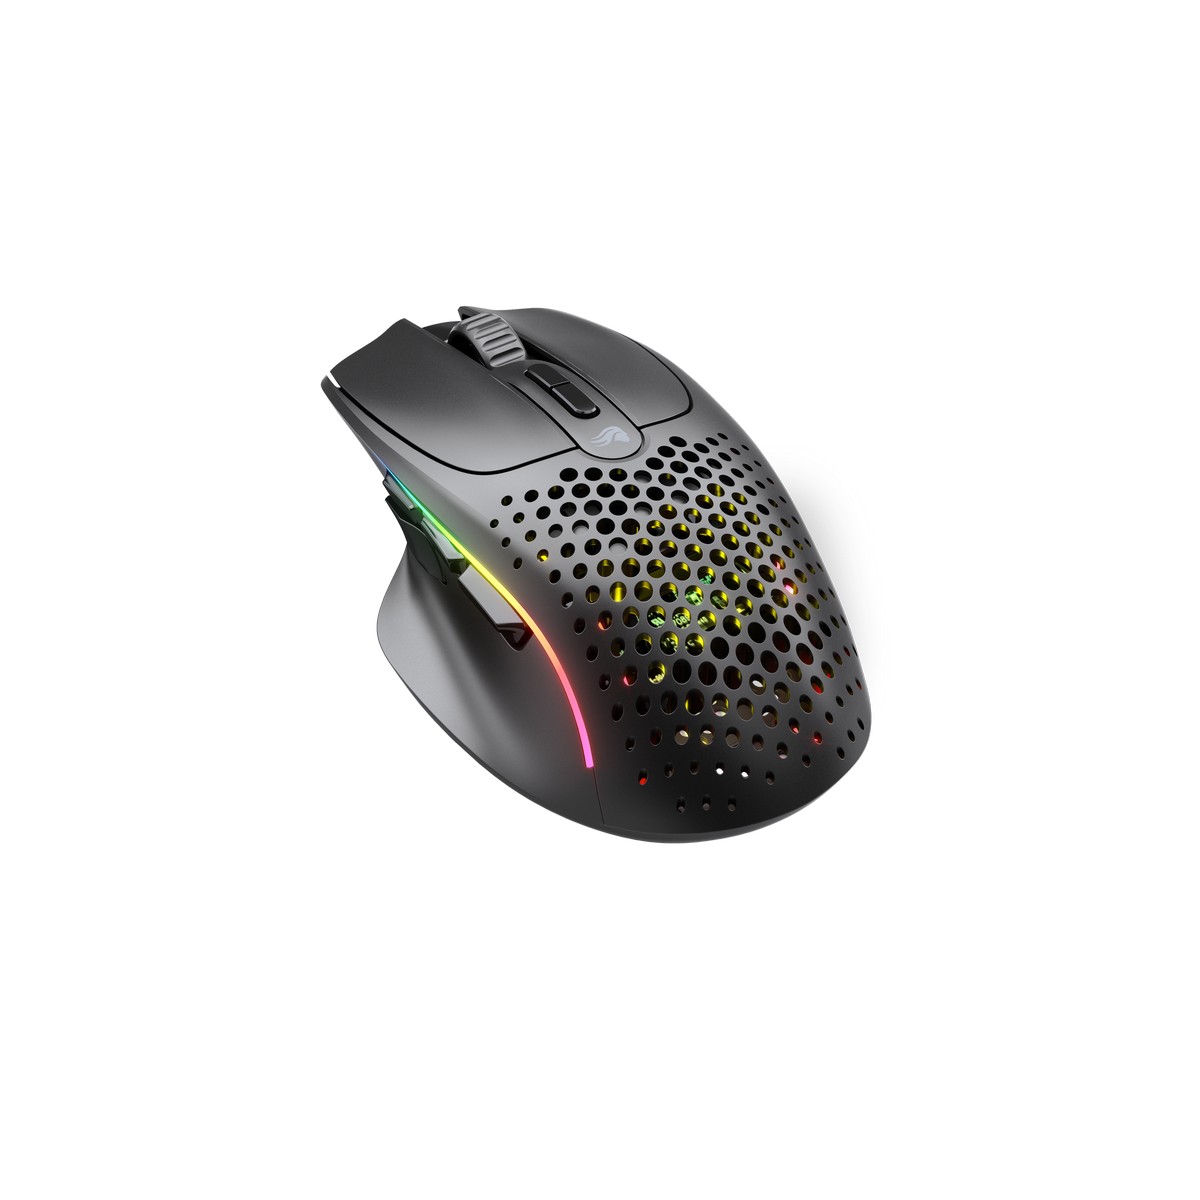 Glorious Model I 2 Wireless RGB Optical Gaming Mouse - Matte Black (GLO-MS-IWV2-MB)